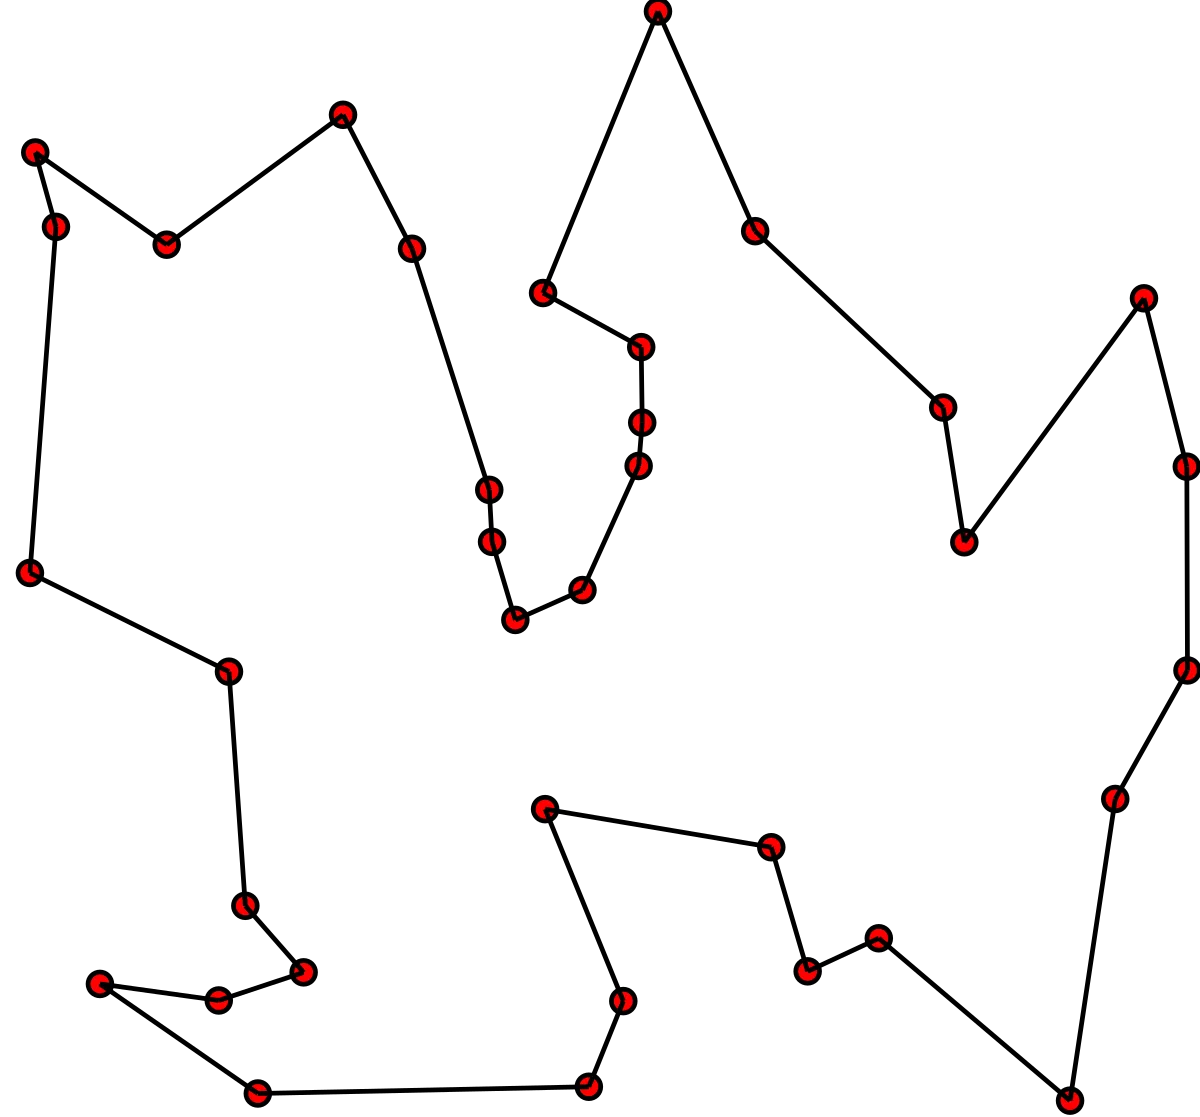 Travelling Salesman Problem Using Simulated Annealing